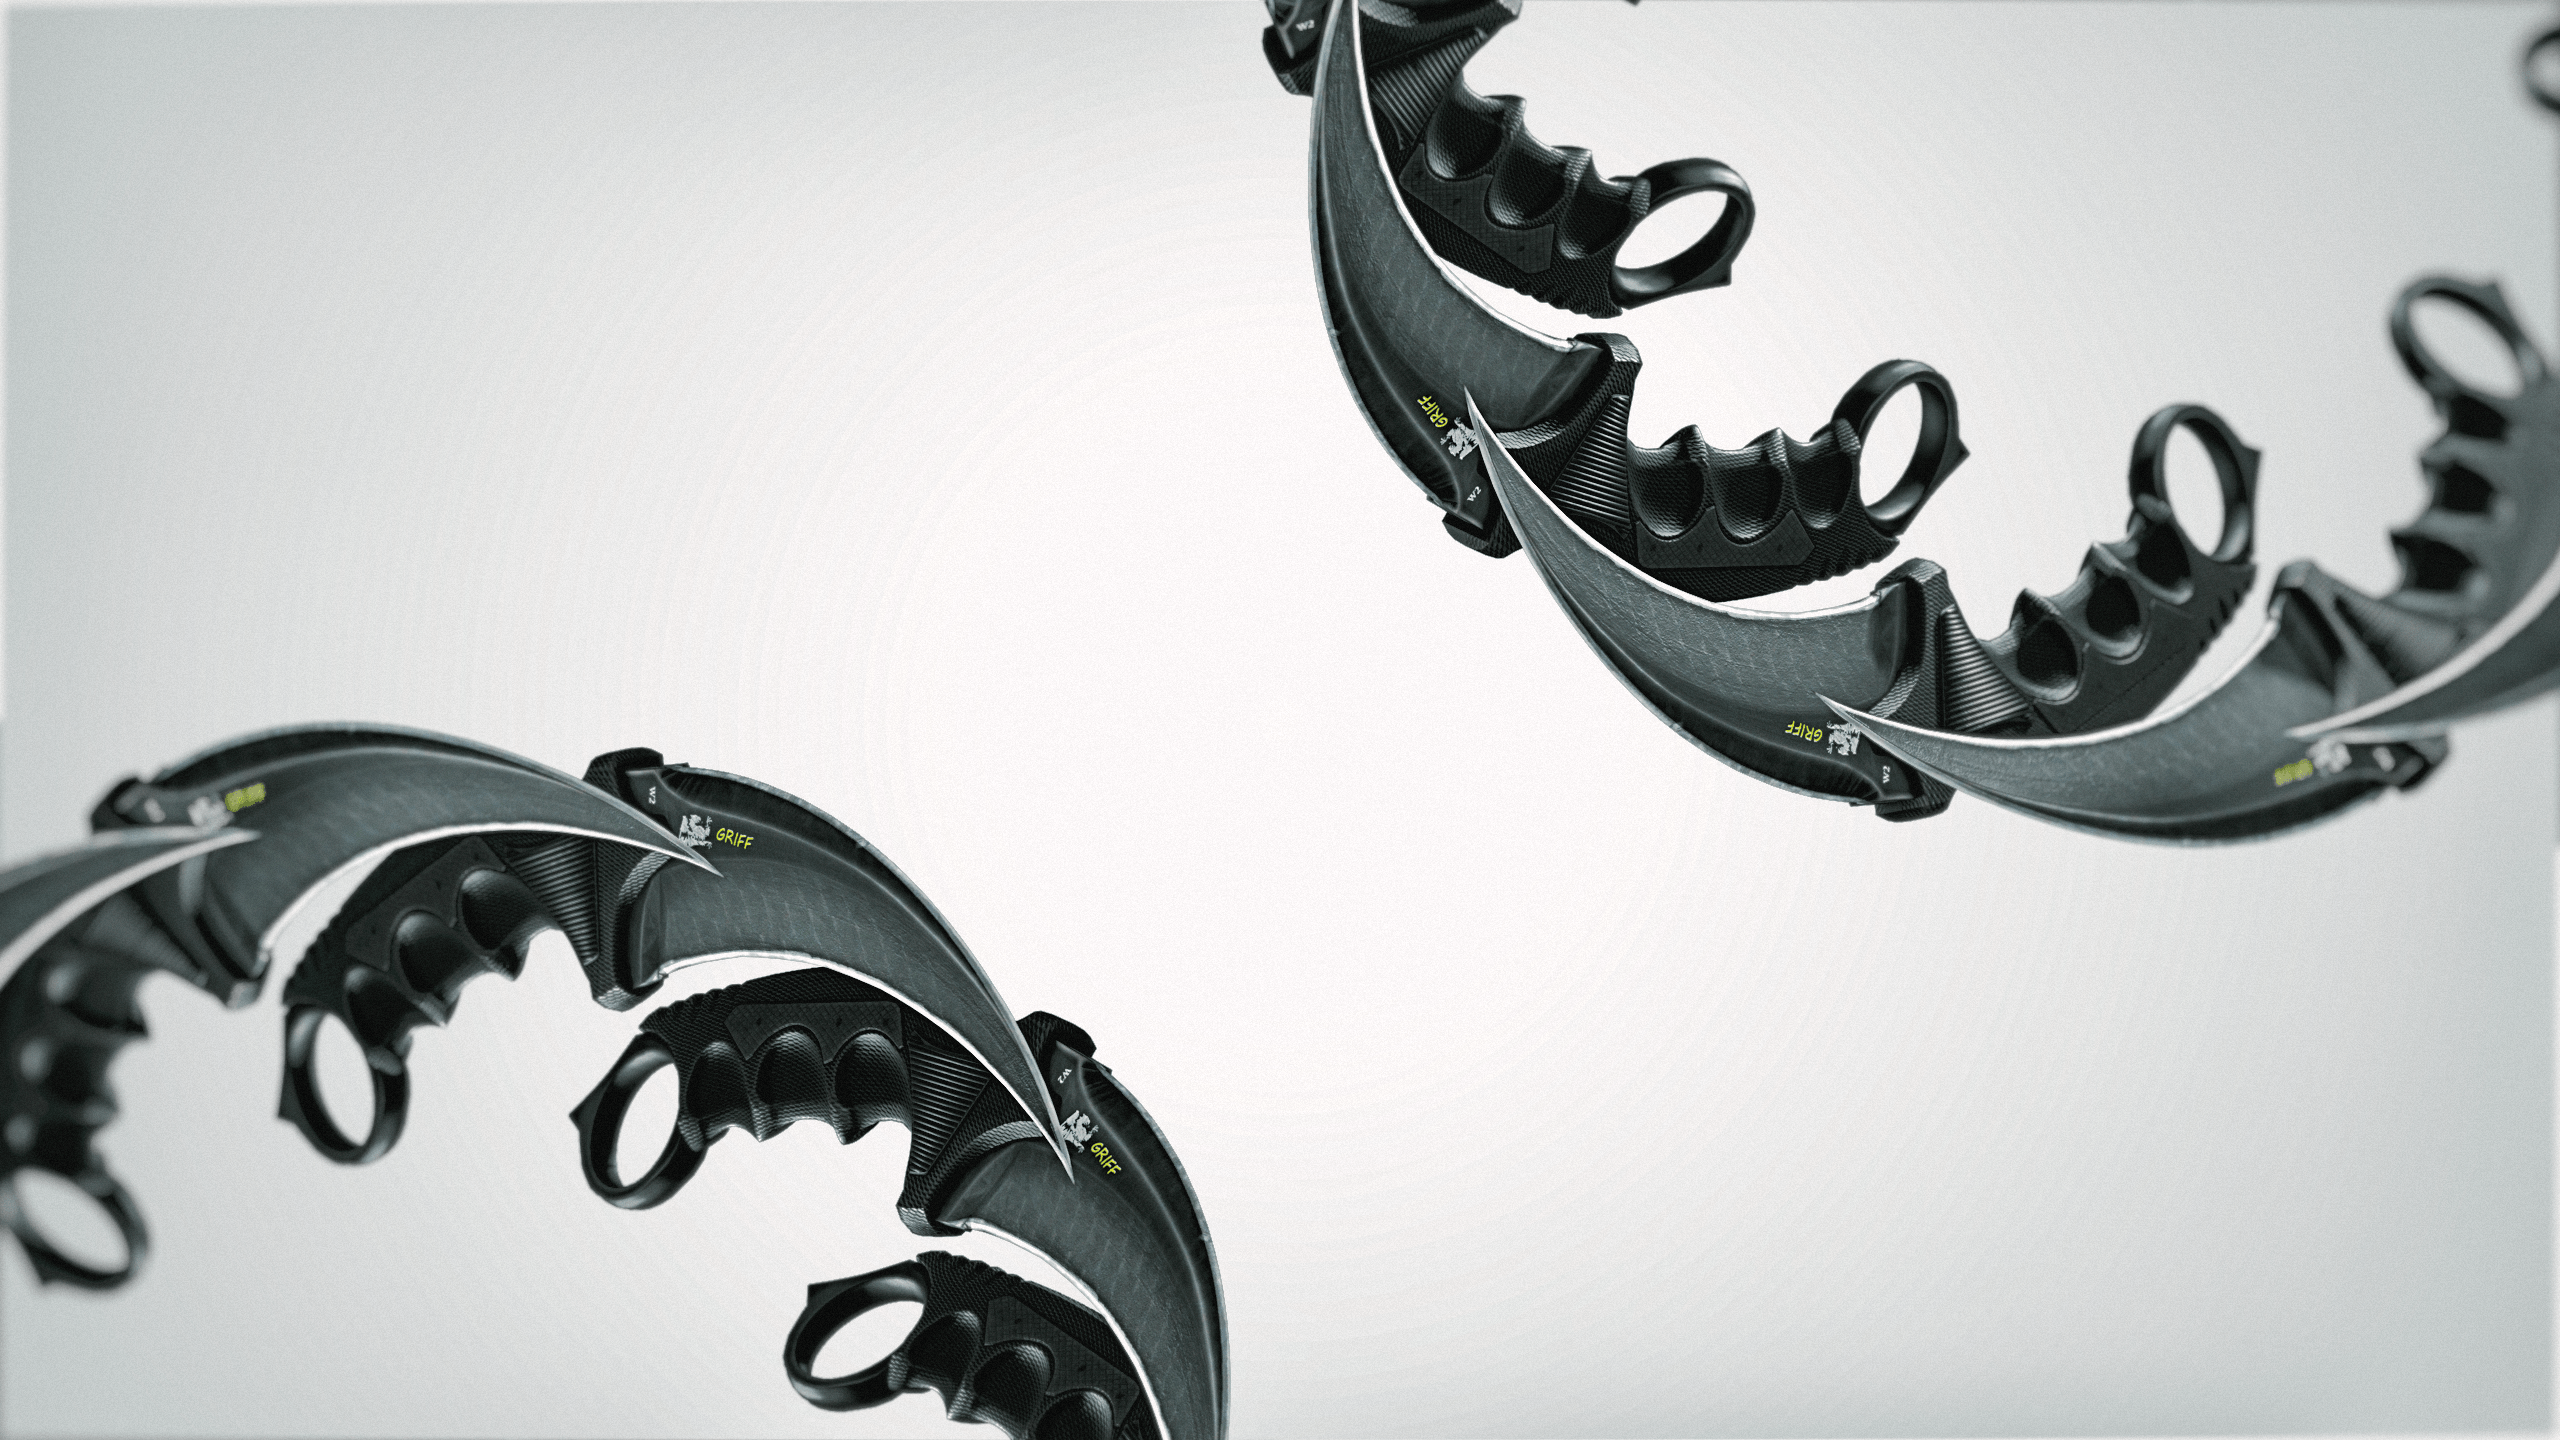 Karambit Wallpaper I made for my own use. Thought you guys would